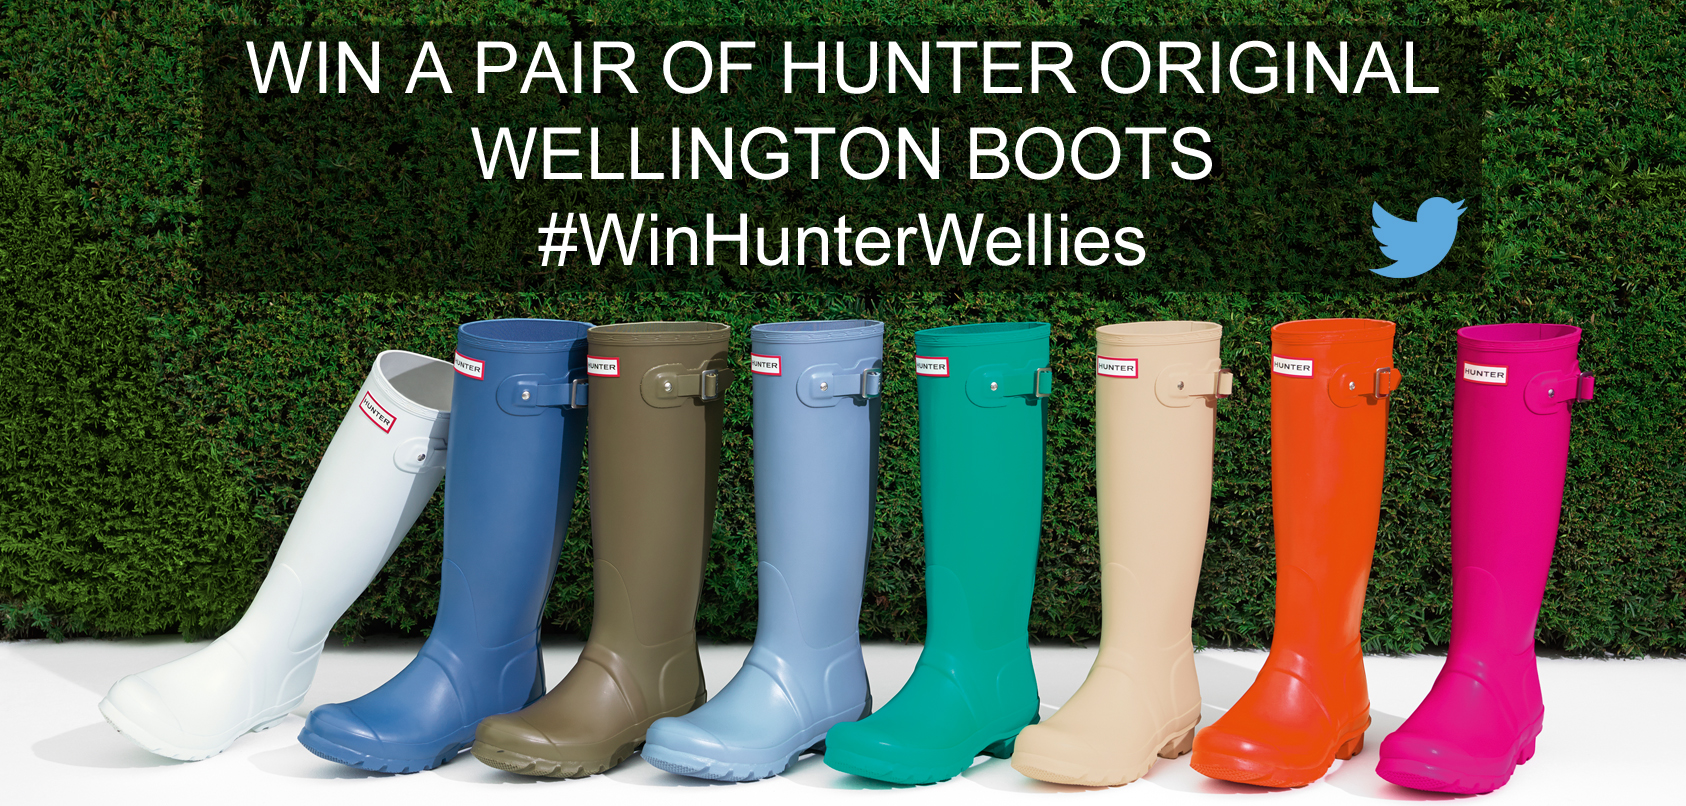 Twitter Competition: Win a Pair of Hunter Original Wellington Boots with Philip Morris and Son